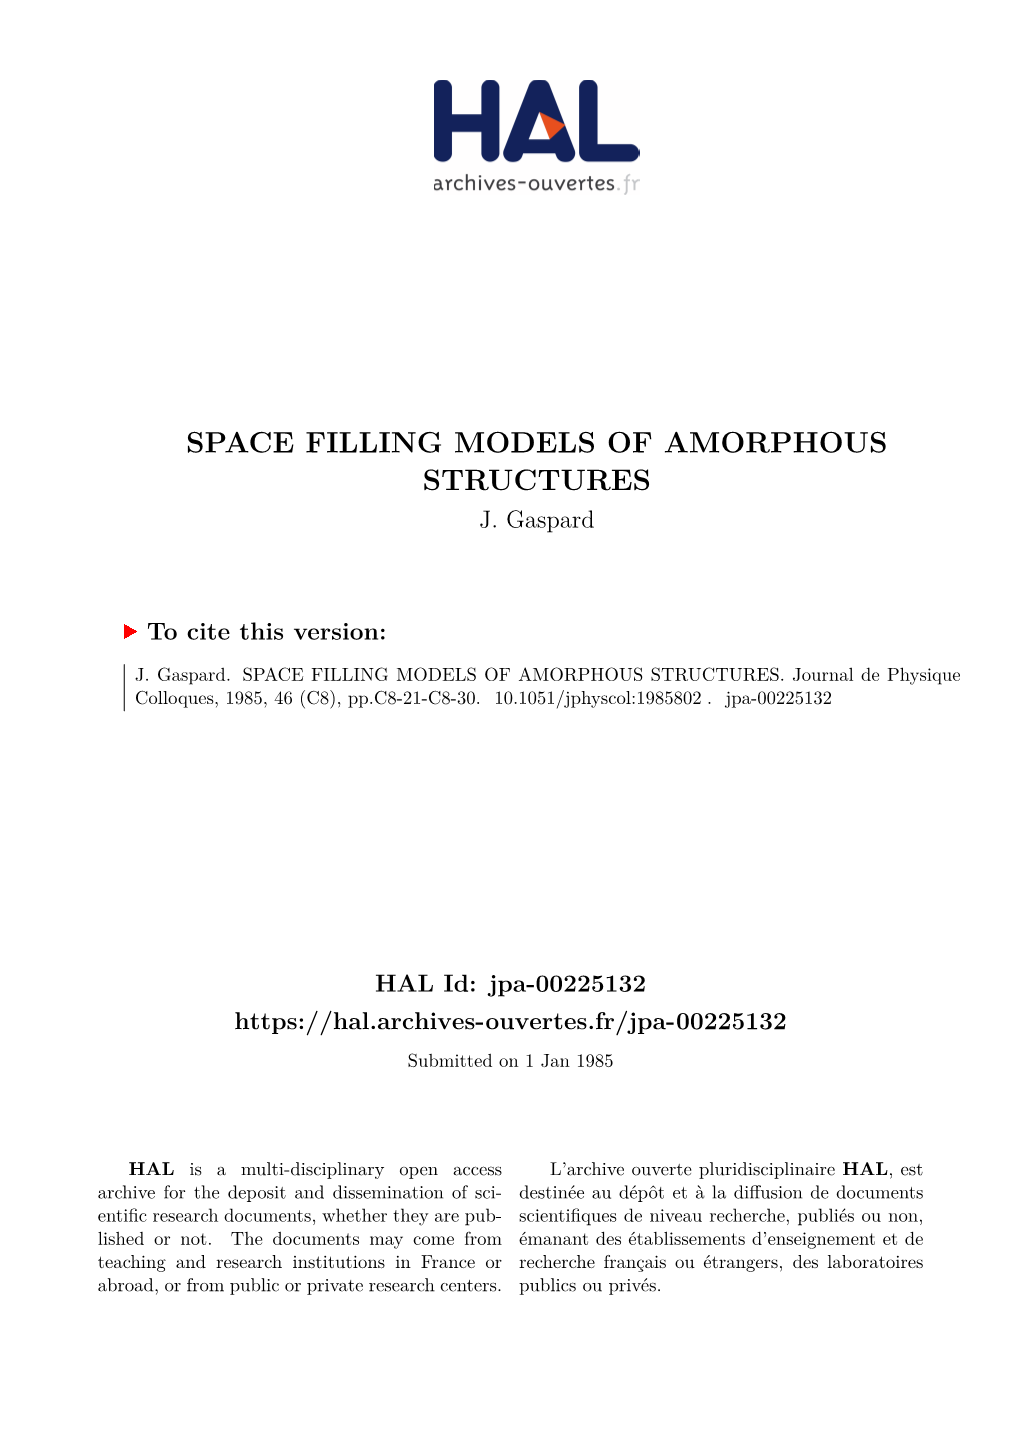 Space Filling Models of Amorphous Structures J